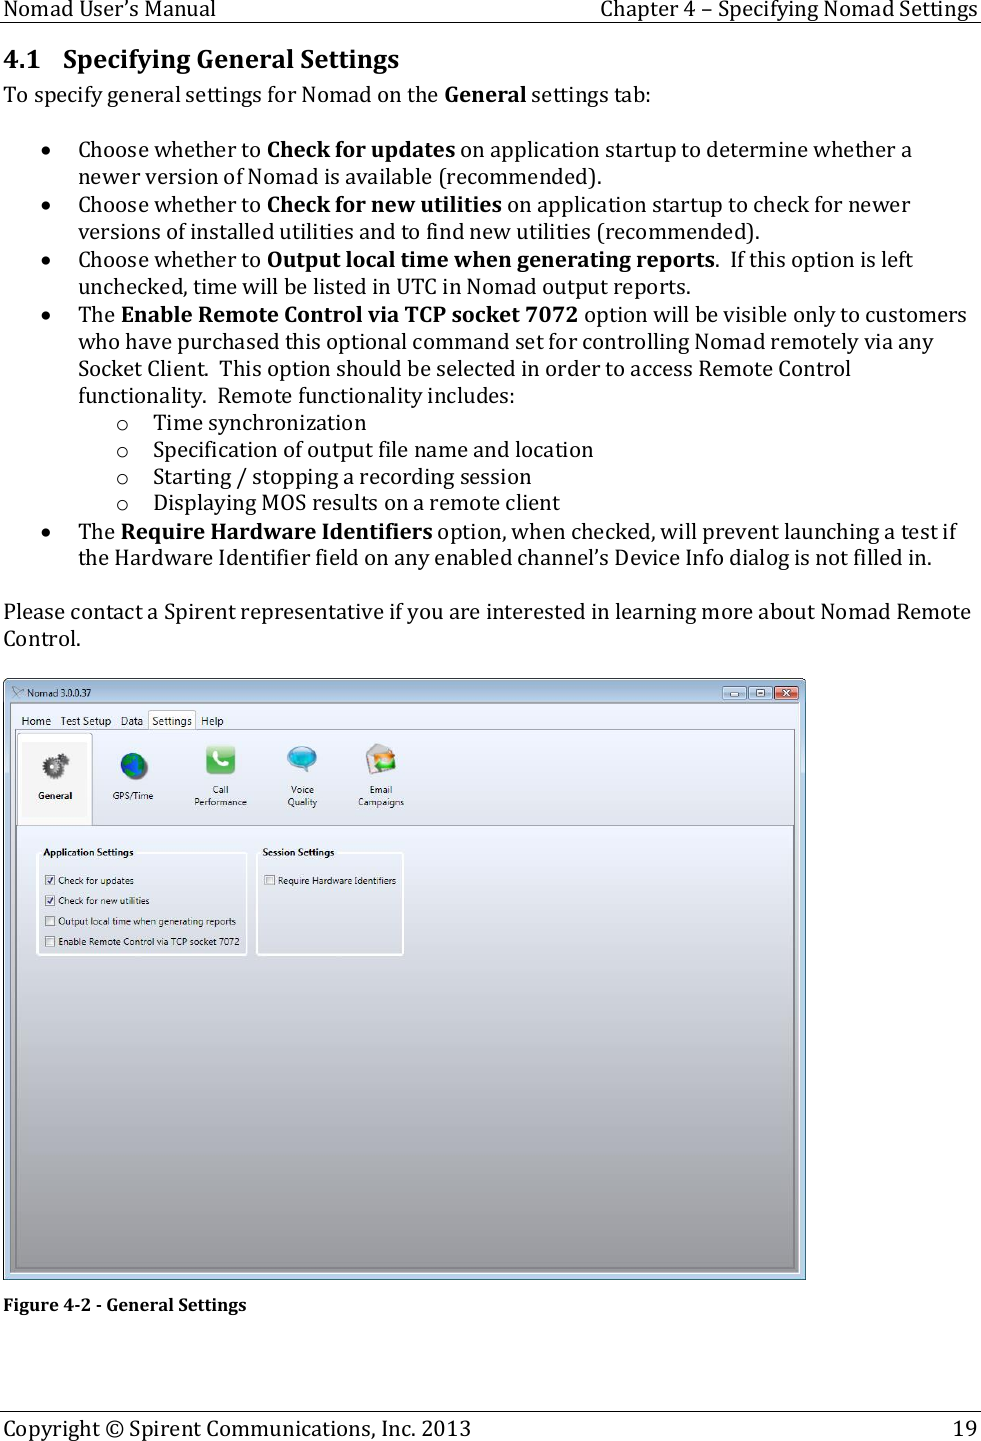  Nomad User’s Manual  Chapter 4 – Specifying Nomad Settings Copyright © Spirent Communications, Inc. 2013    19  4.1 Specifying General Settings To specify general settings for Nomad on the General settings tab:   Choose whether to Check for updates on application startup to determine whether a newer version of Nomad is available (recommended).  Choose whether to Check for new utilities on application startup to check for newer versions of installed utilities and to find new utilities (recommended).  Choose whether to Output local time when generating reports.  If this option is left unchecked, time will be listed in UTC in Nomad output reports.  The Enable Remote Control via TCP socket 7072 option will be visible only to customers who have purchased this optional command set for controlling Nomad remotely via any Socket Client.  This option should be selected in order to access Remote Control functionality.  Remote functionality includes: o Time synchronization o Specification of output file name and location o Starting / stopping a recording session o Displaying MOS results on a remote client  The Require Hardware Identifiers option, when checked, will prevent launching a test if the Hardware Identifier field on any enabled channel’s Device Info dialog is not filled in.  Please contact a Spirent representative if you are interested in learning more about Nomad Remote Control.   Figure 4-2 - General Settings   